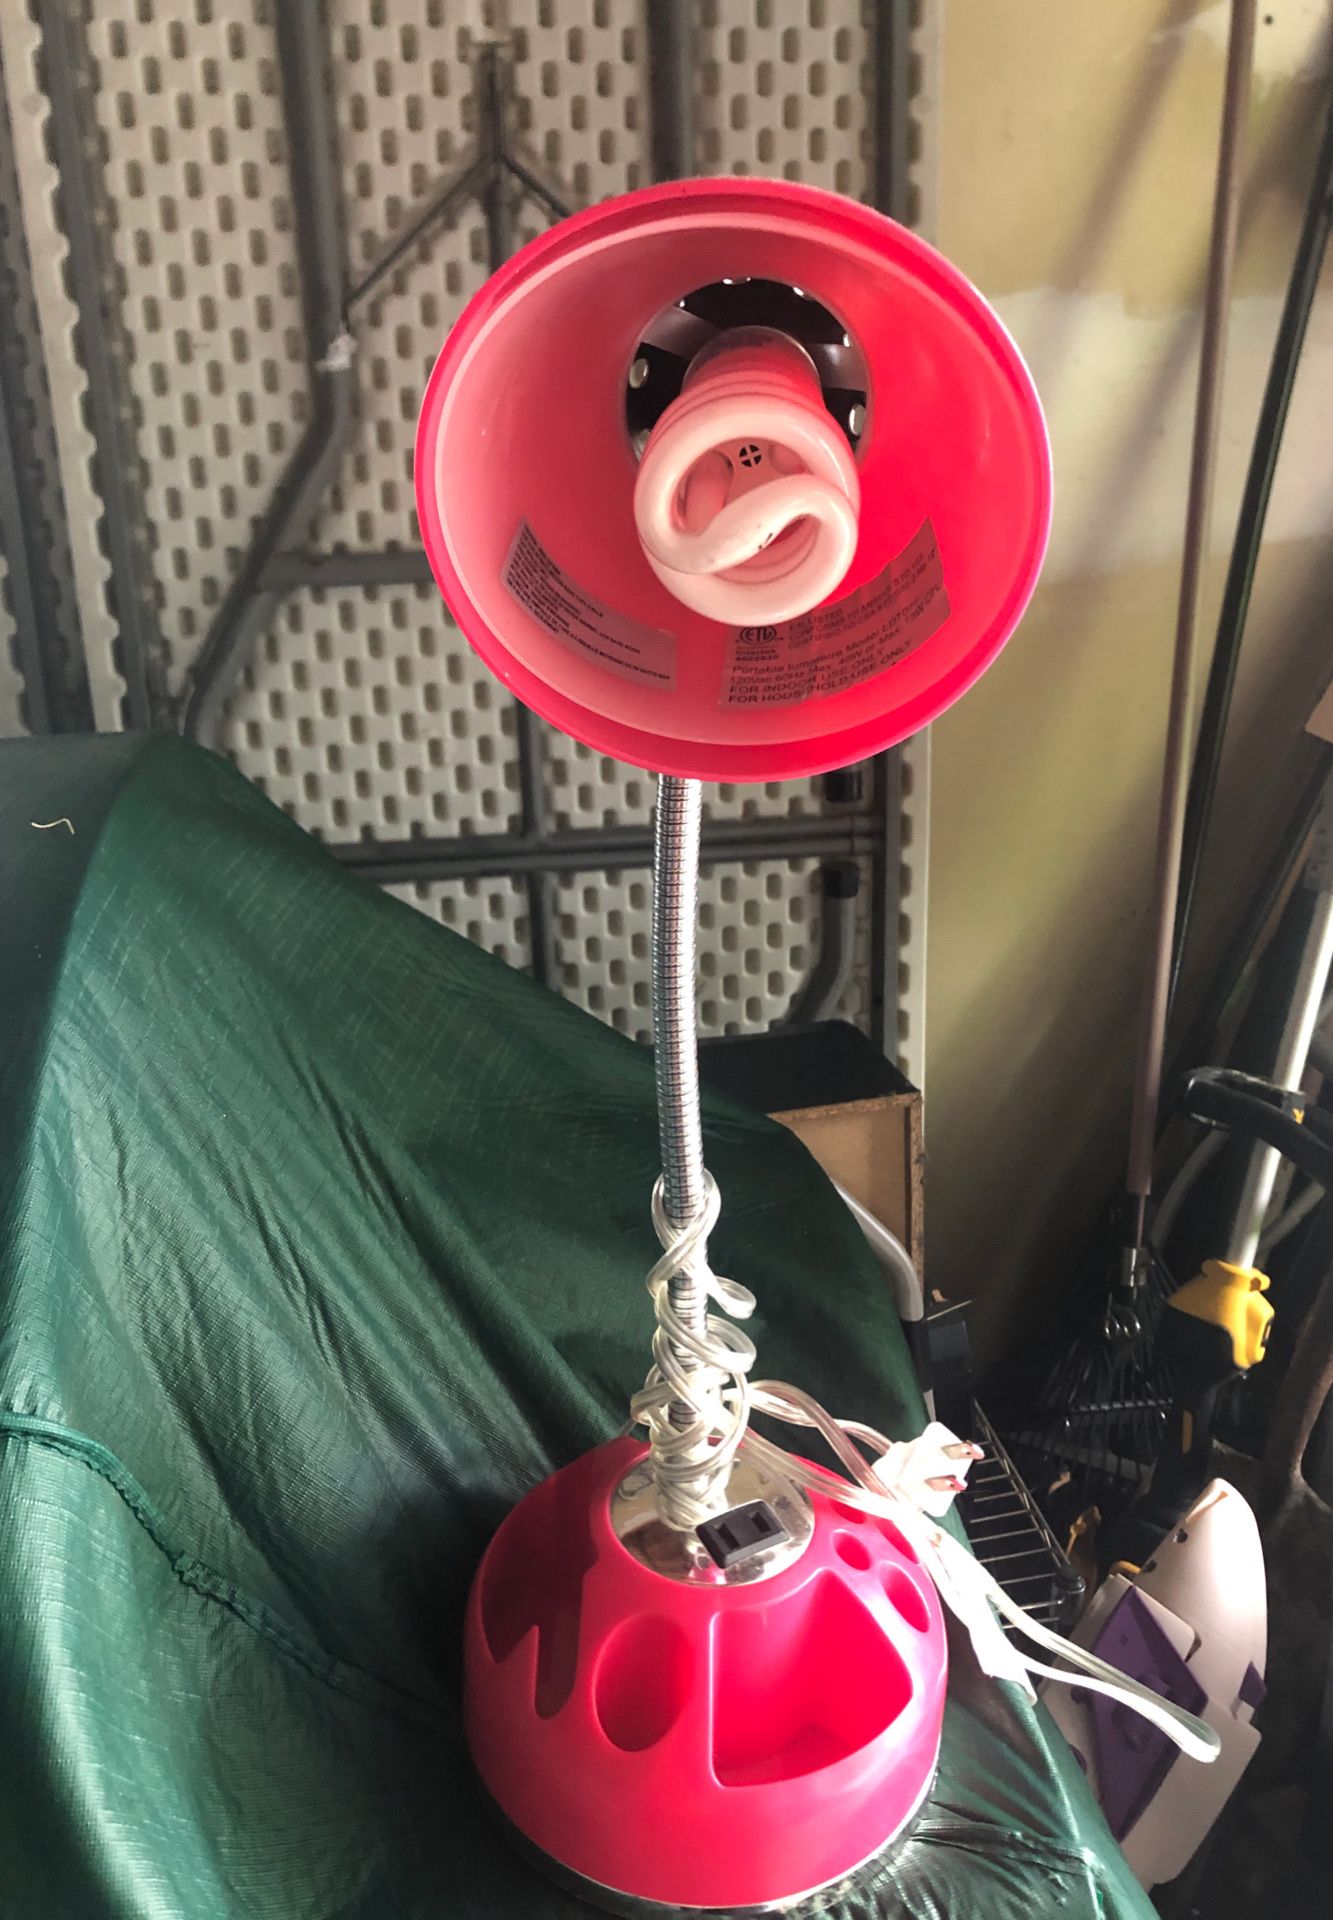 Pink desk lamp with organizer for pins and pencils. $15.00 in good condition